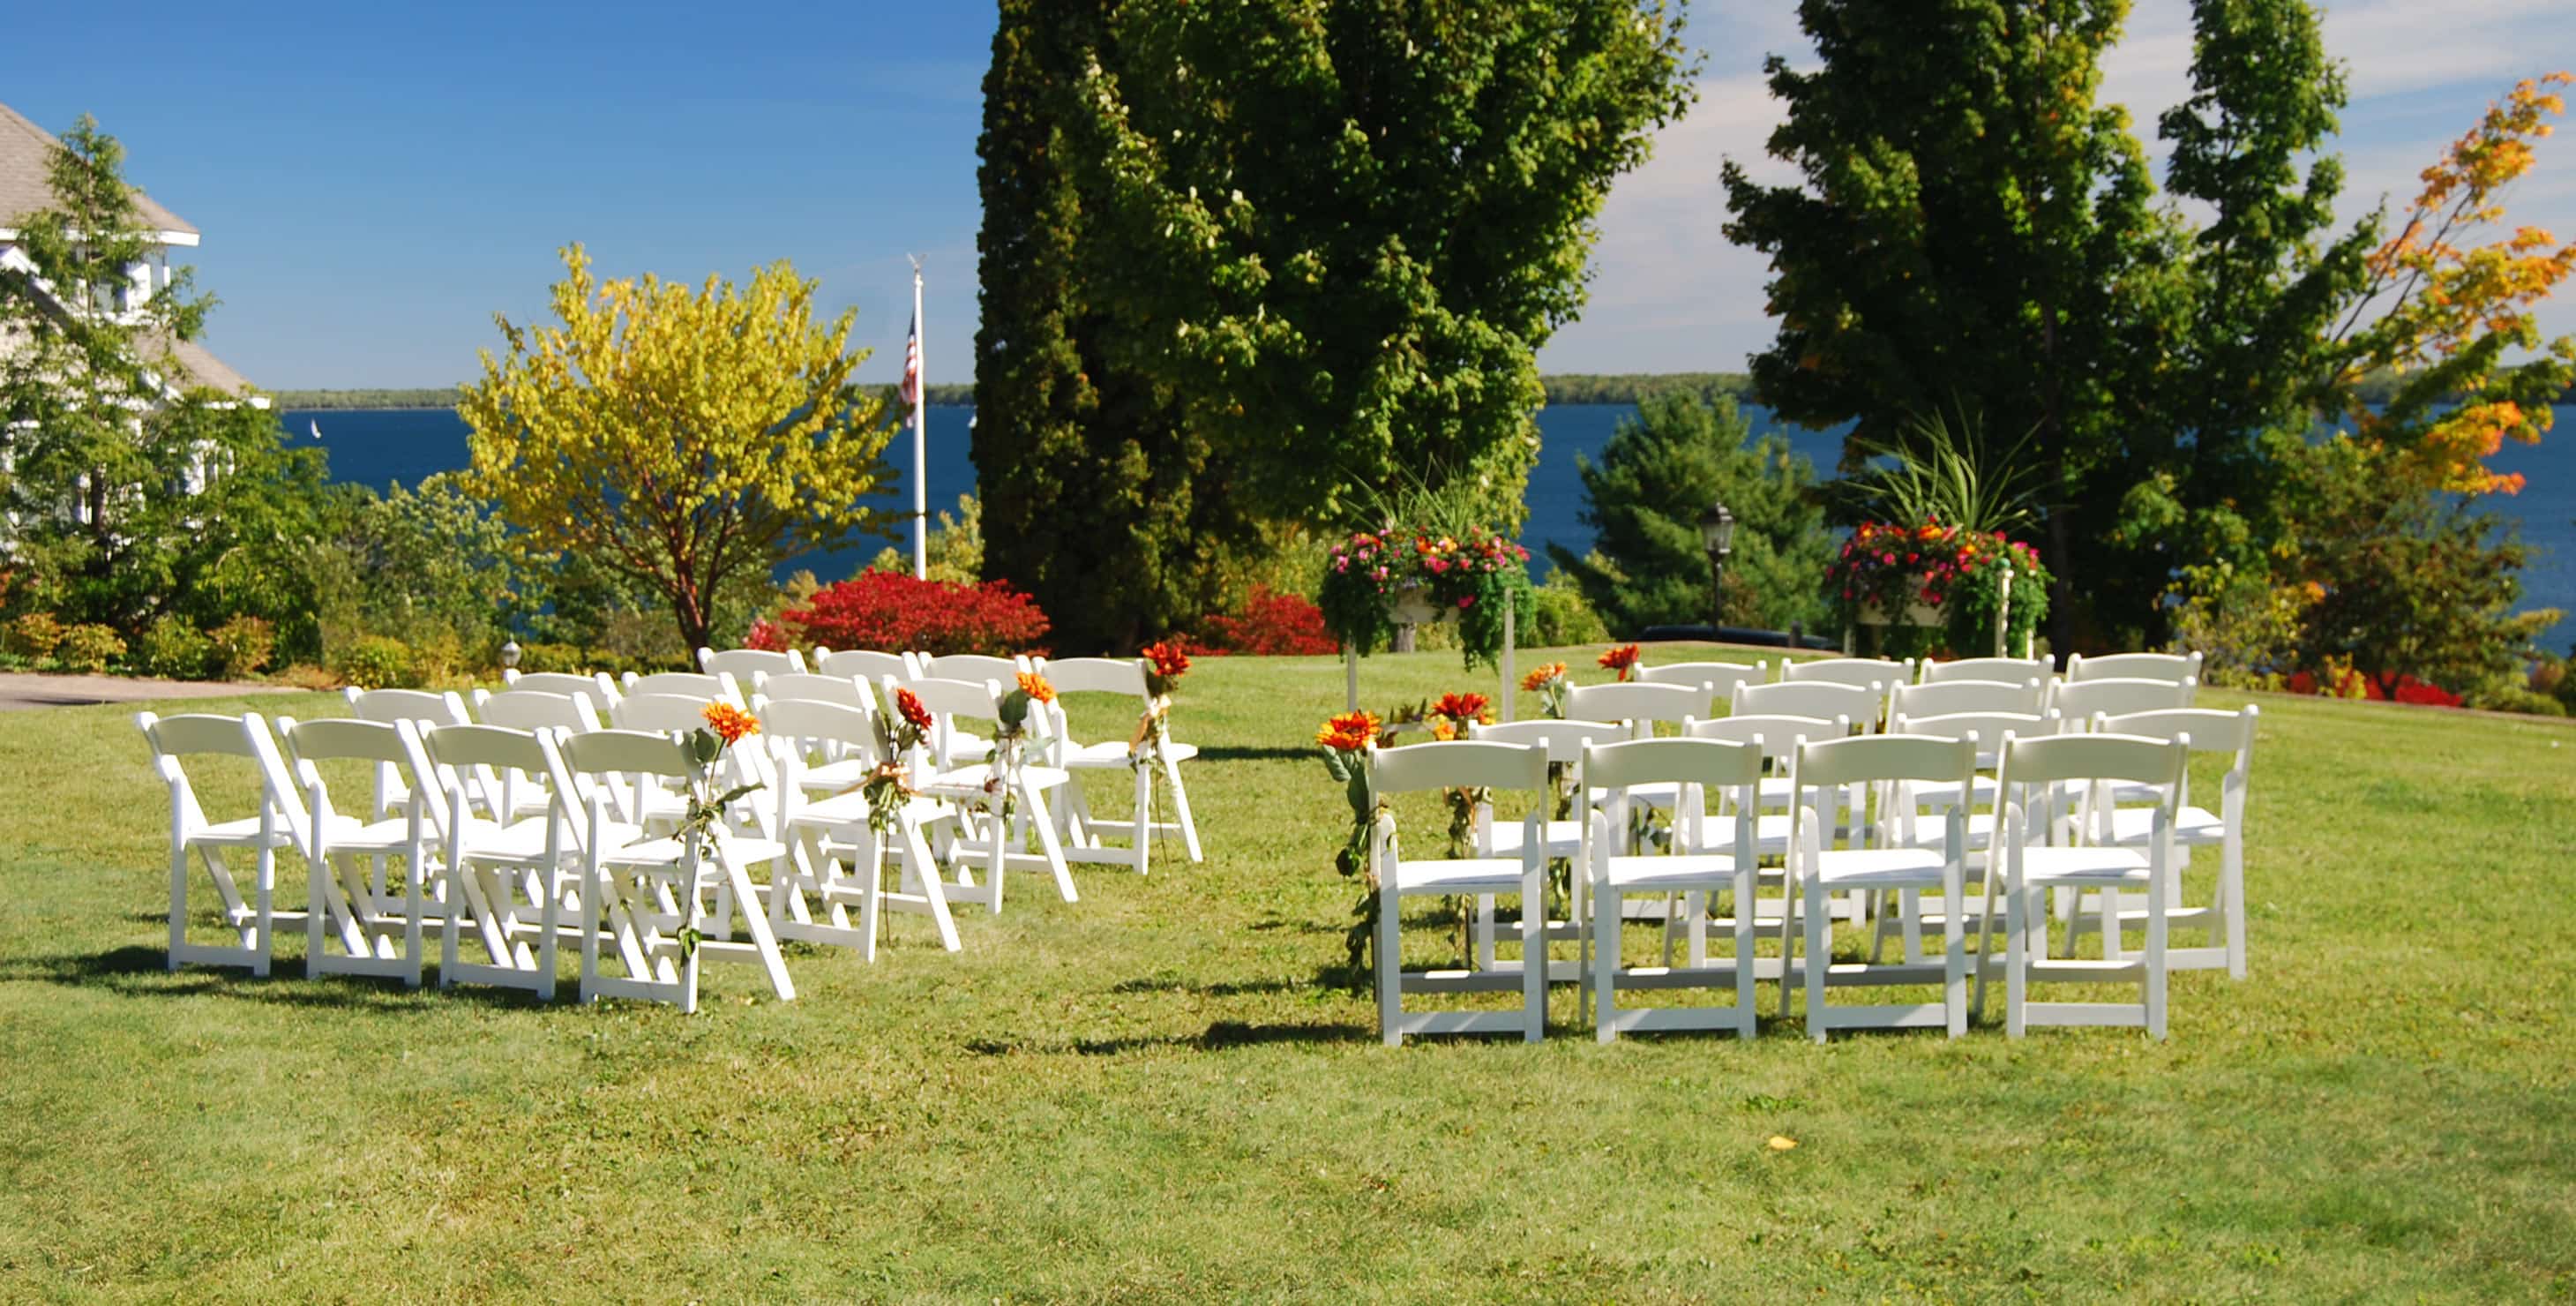 Lawn set up for ceremony with white chairs and water in the background